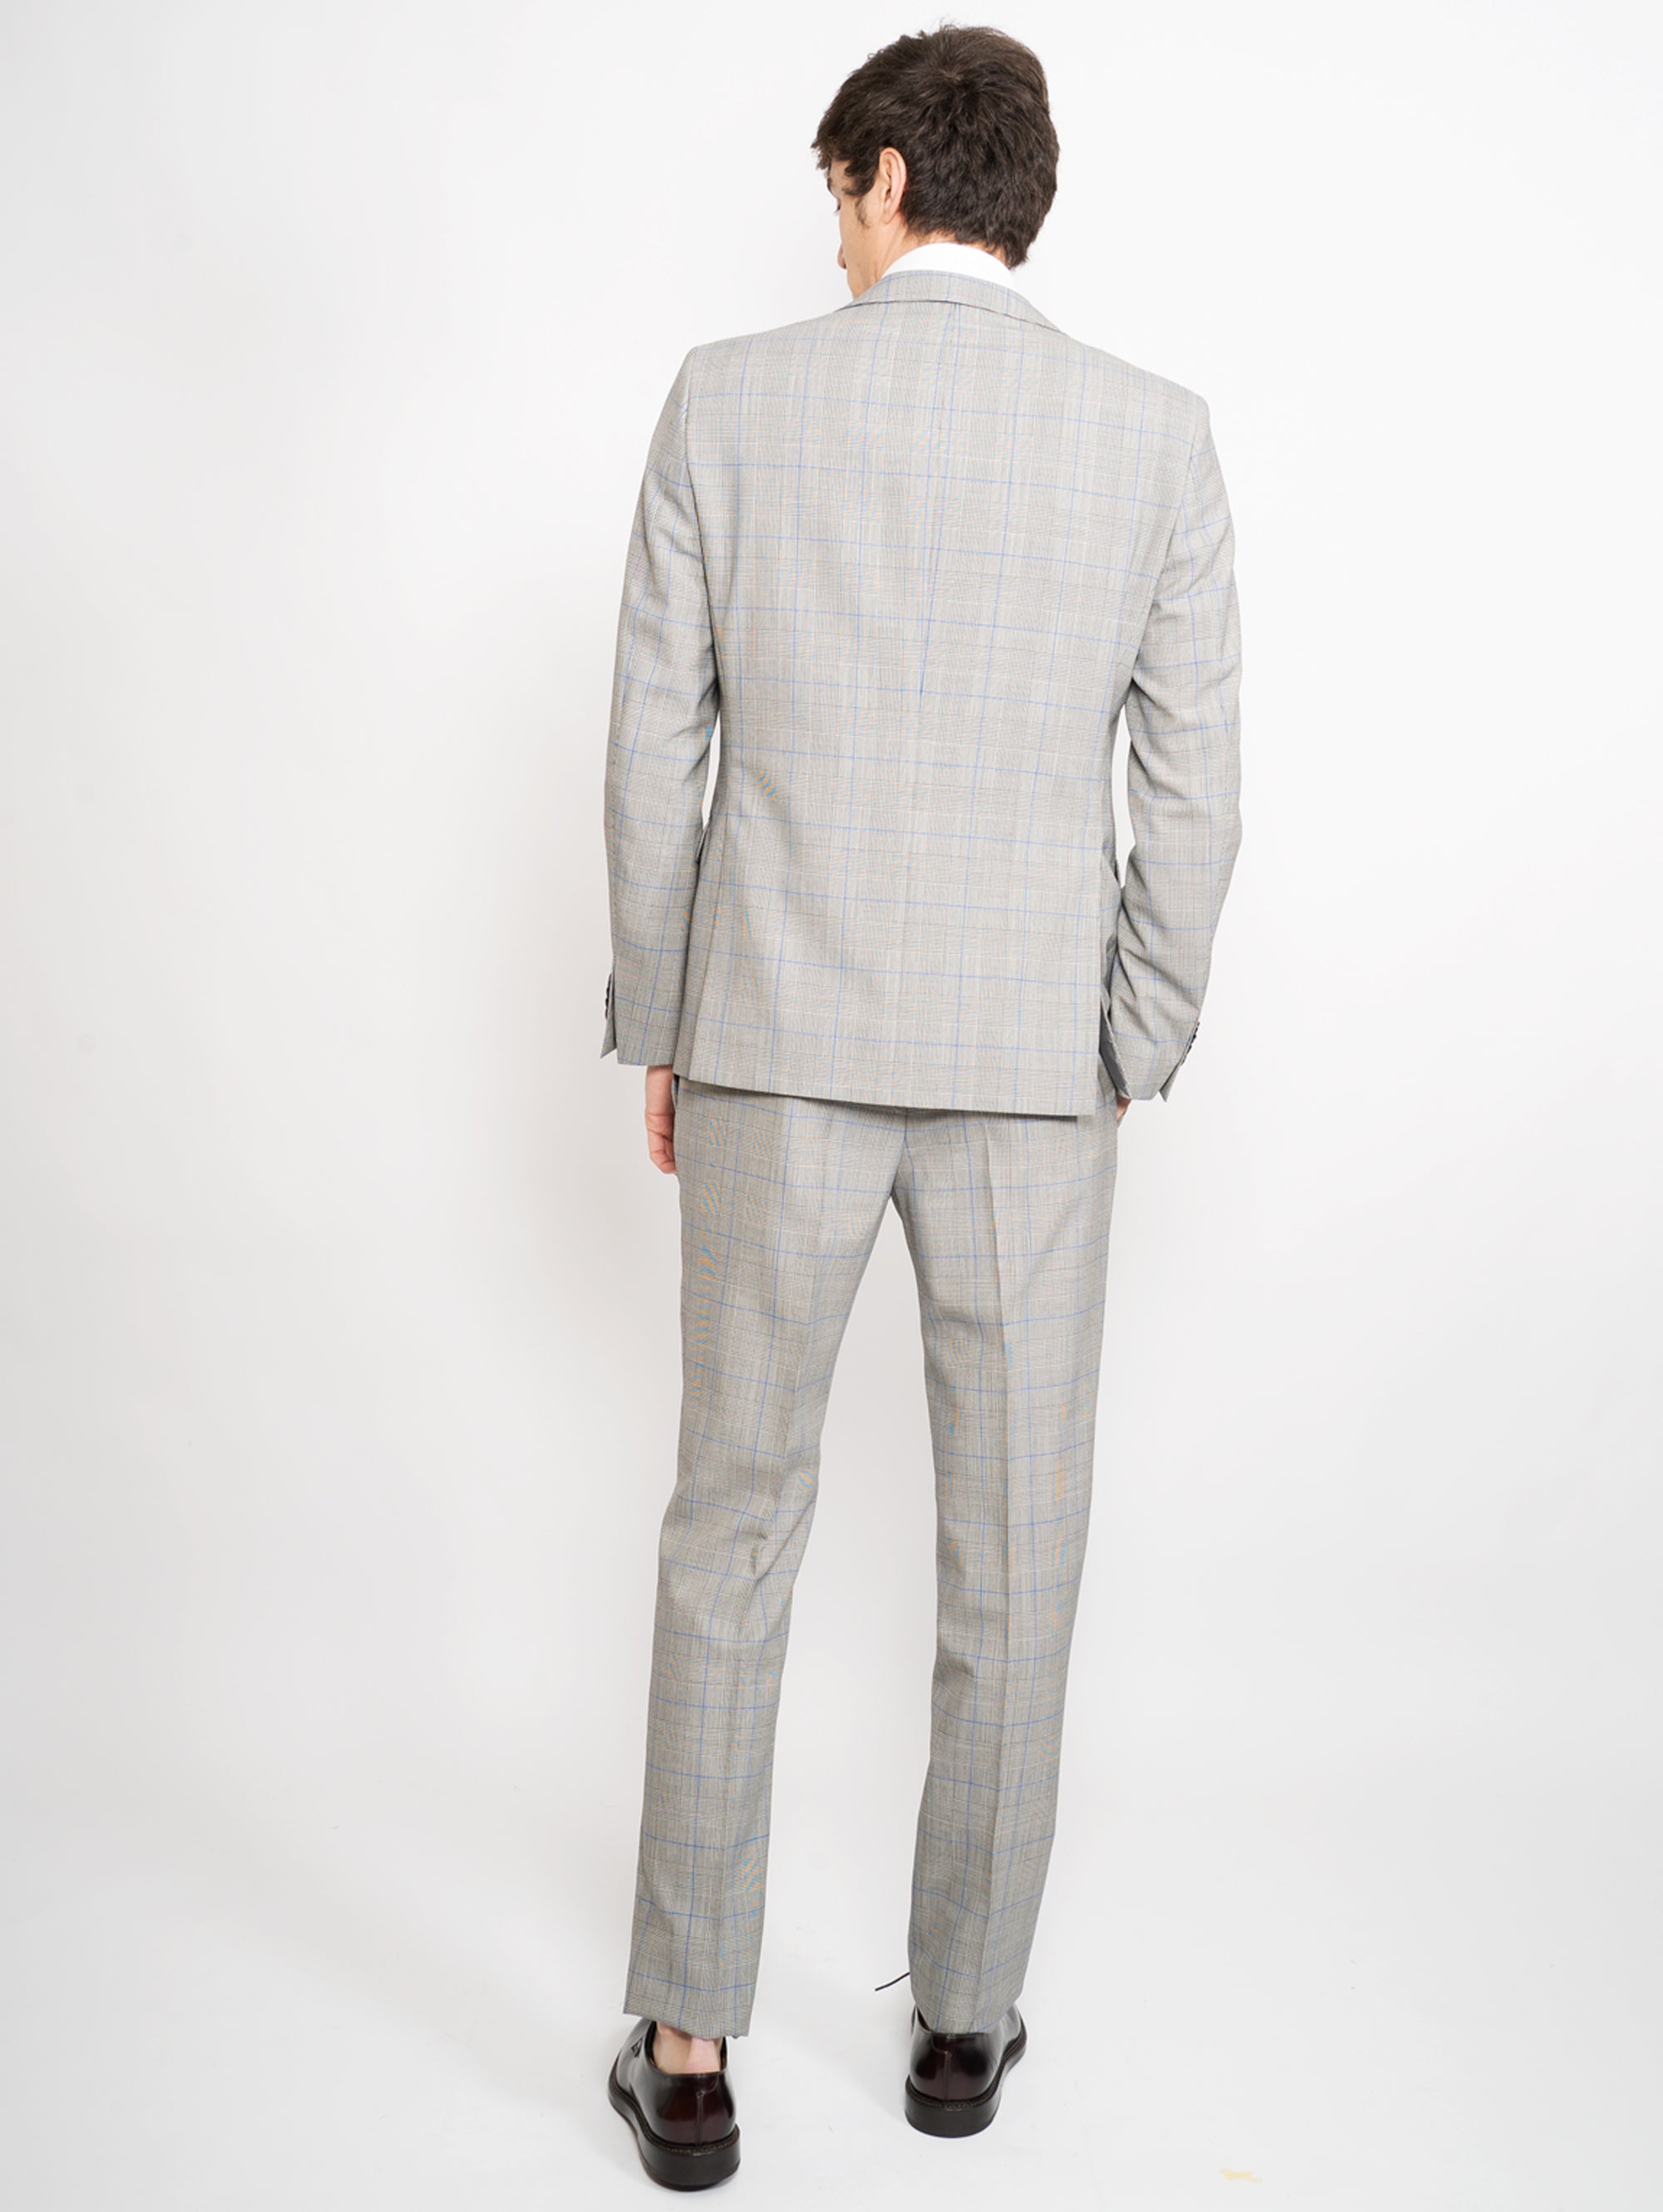 Gray Prince of Wales suit